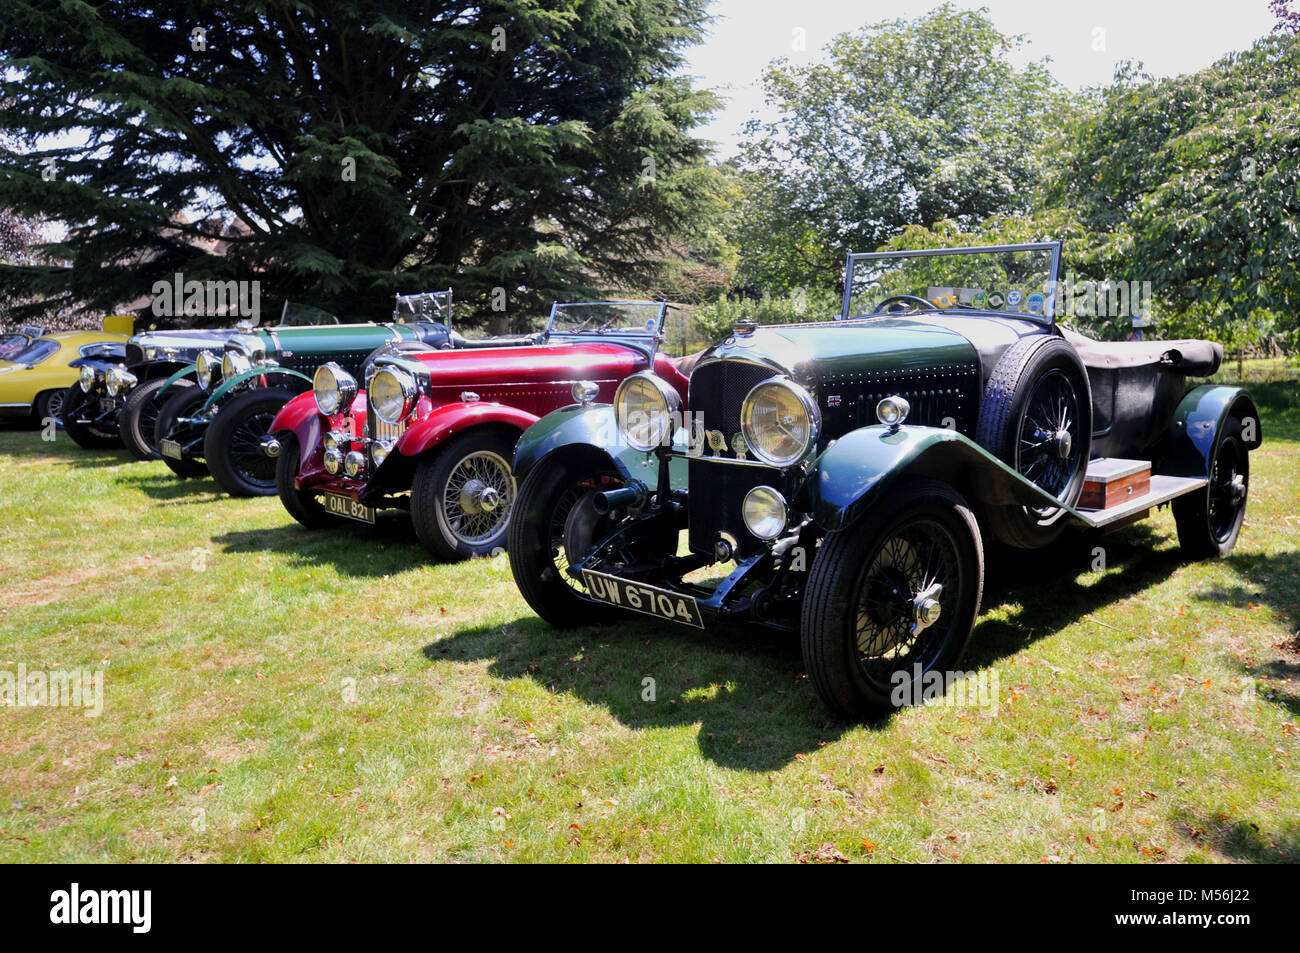 Pre war Bentley classic cars at a show in England Stock Photo